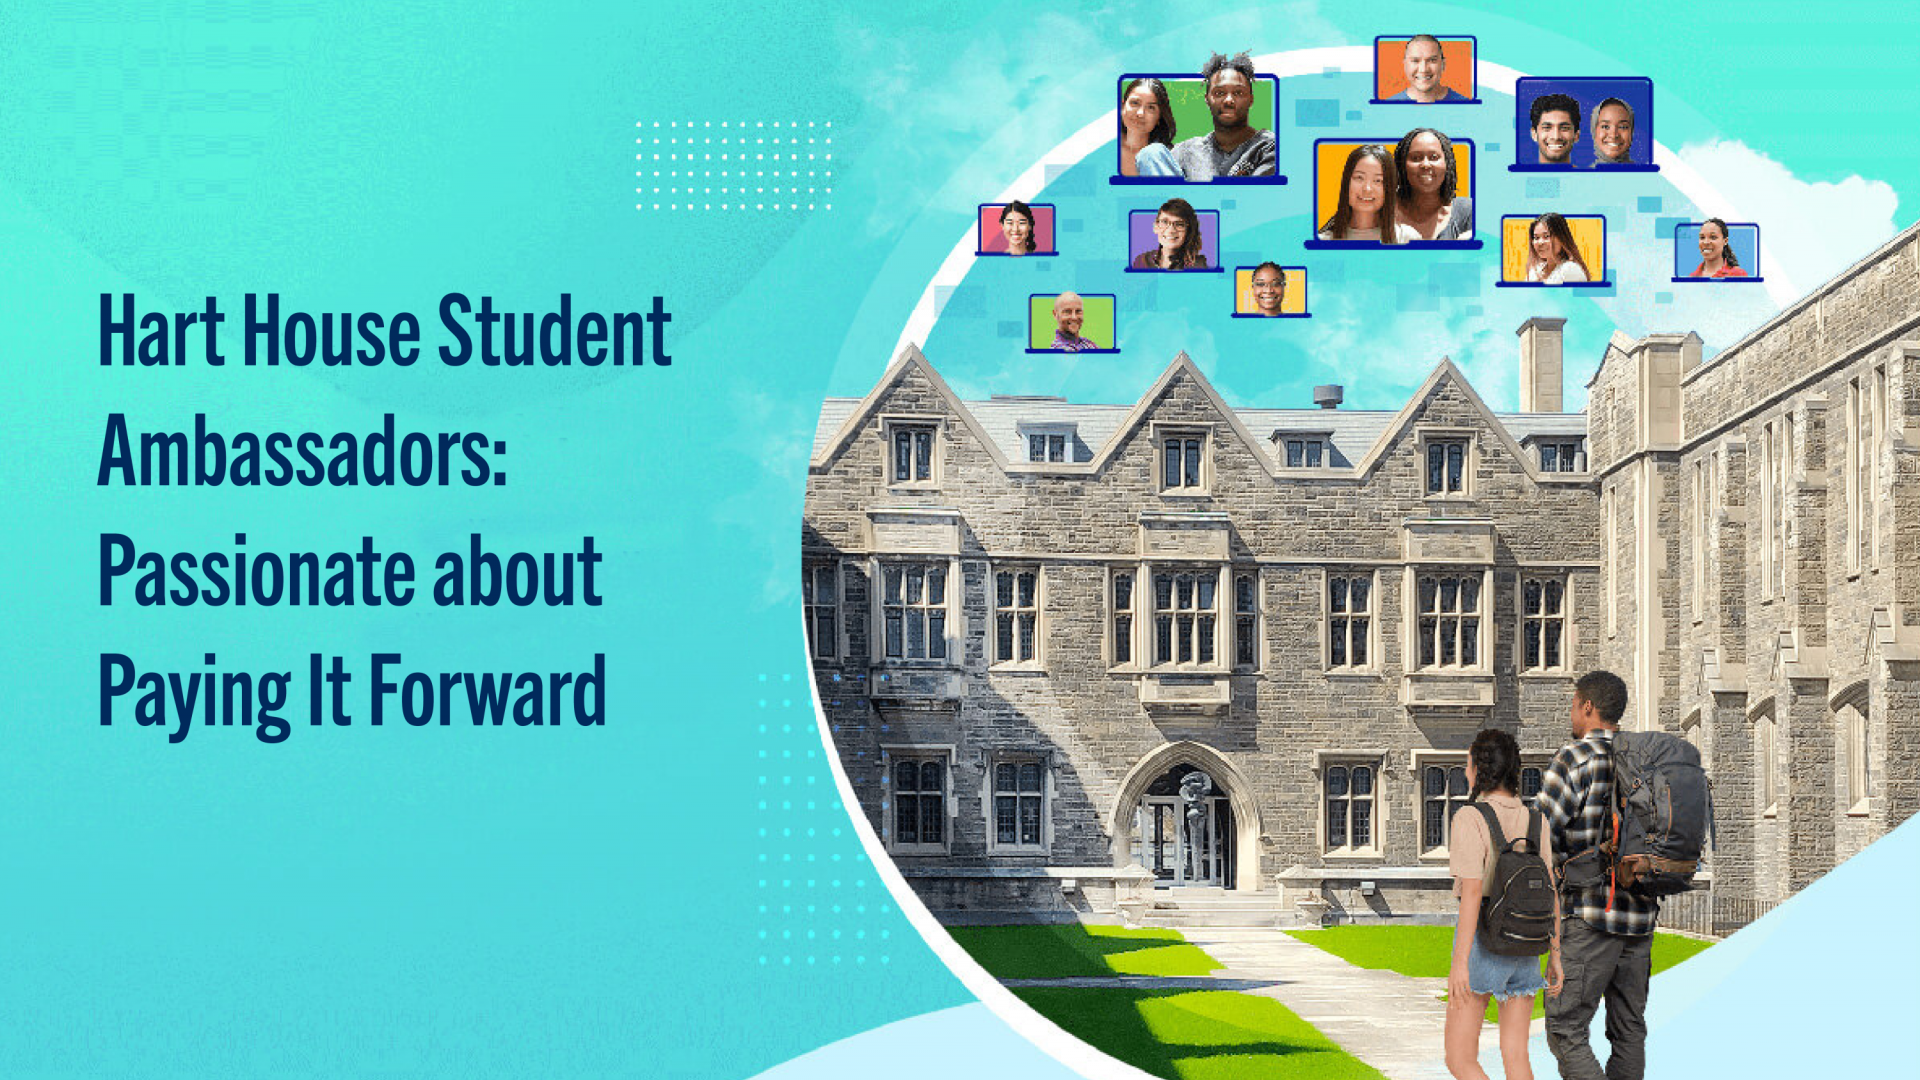 Hart House Student Ambassadors Passionate about Paying It Forward